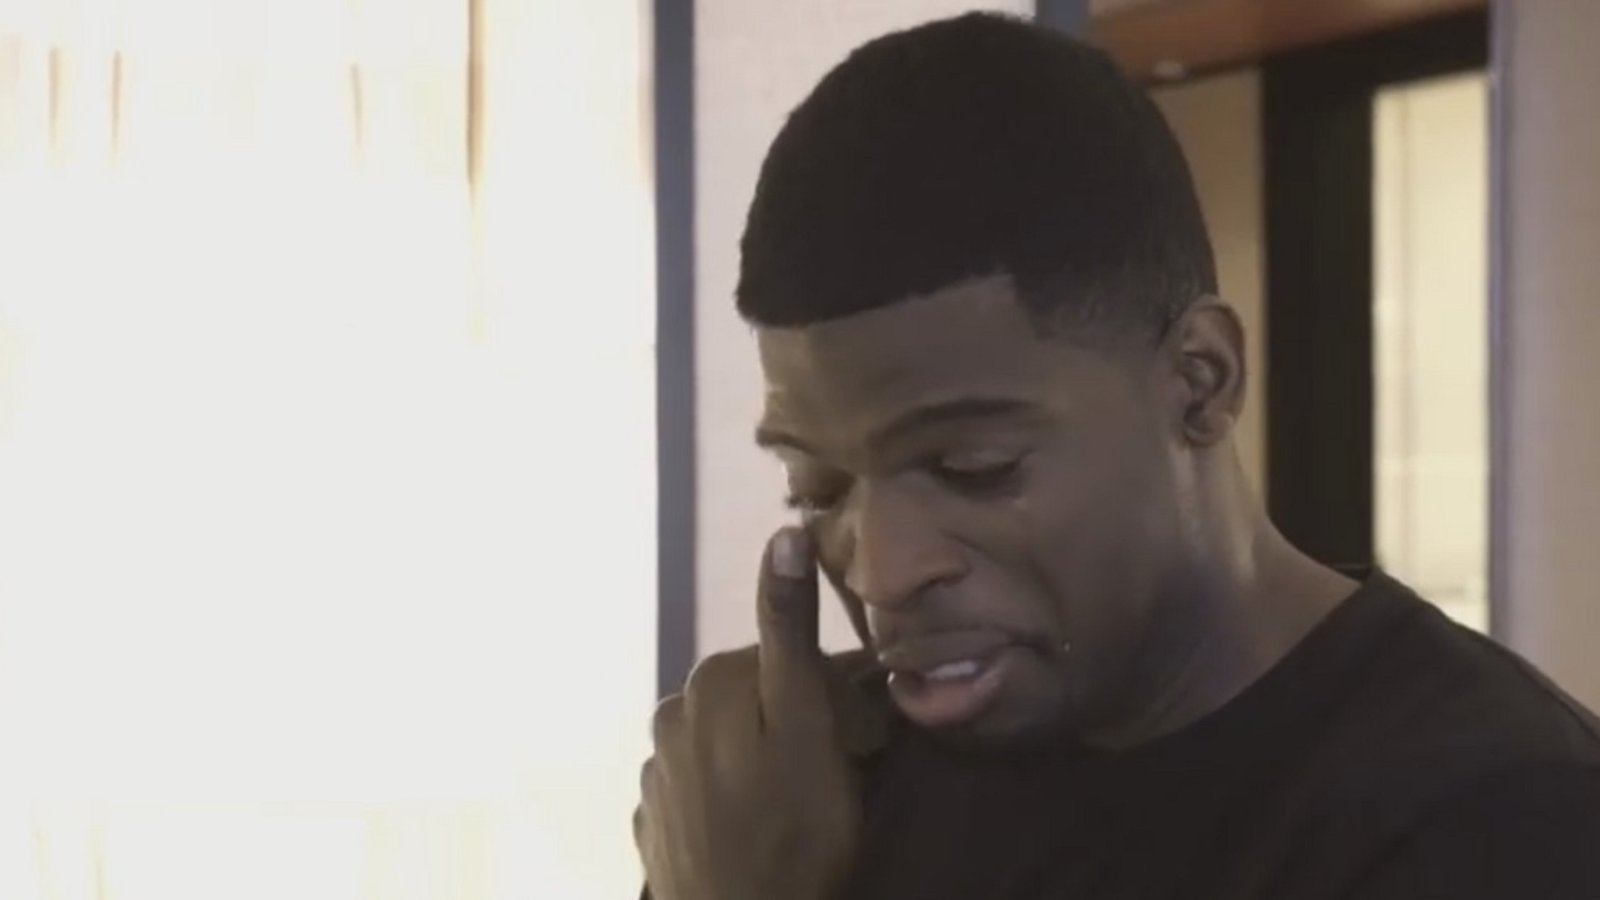 P.K. Subban  in tears as he explains why he's so committed to helping sick kids.